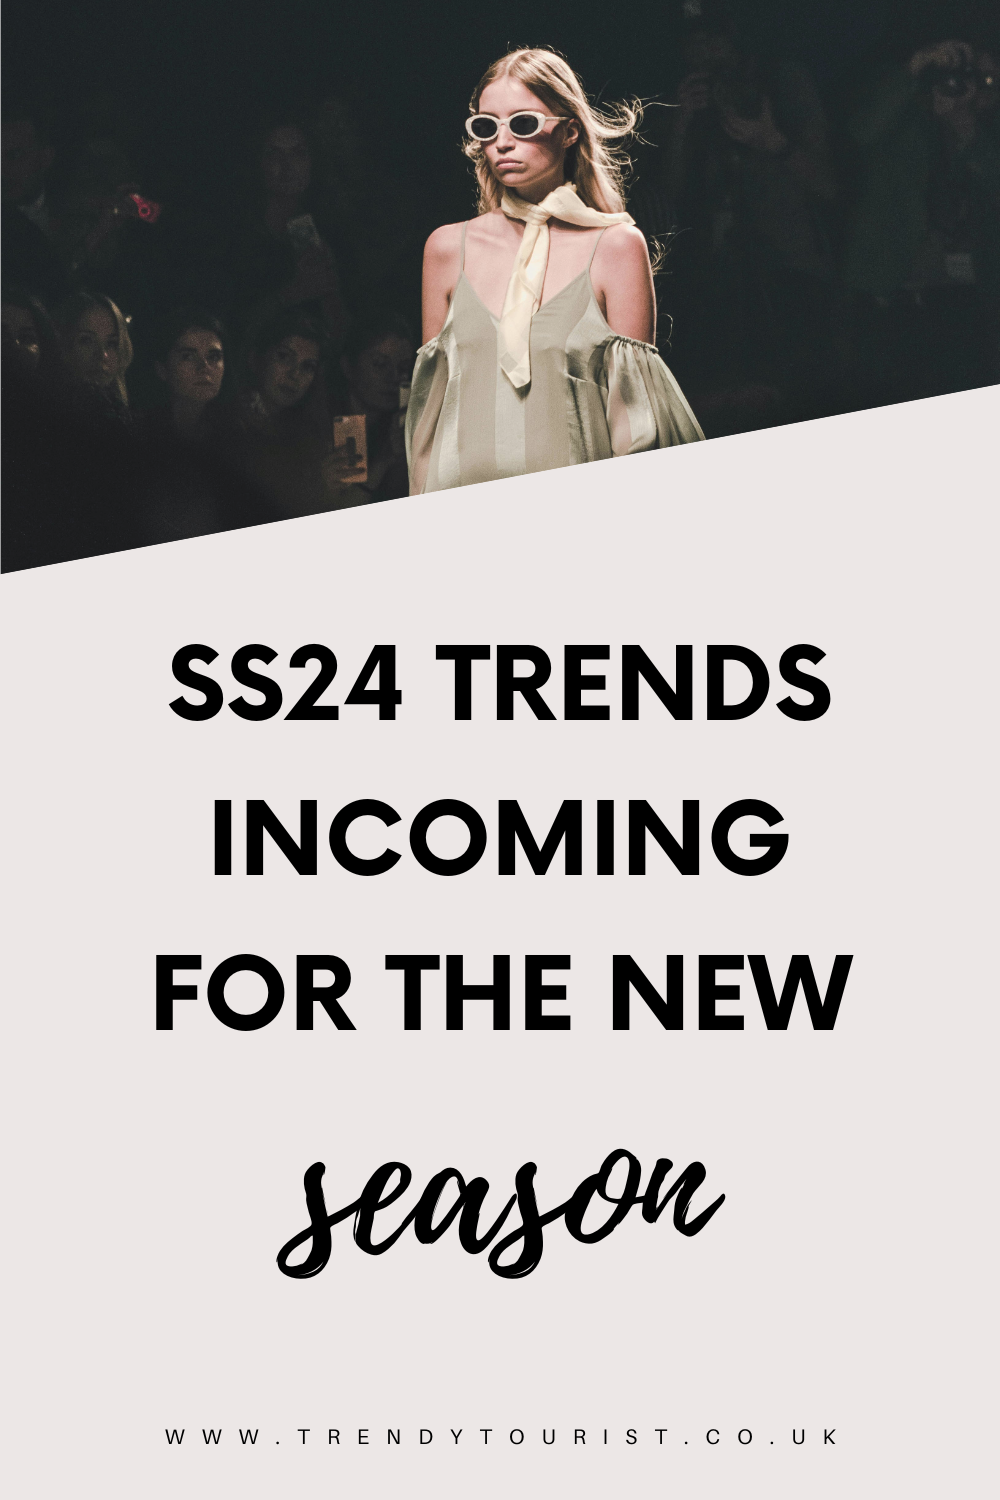 SS24 Trends Incoming for the New Season